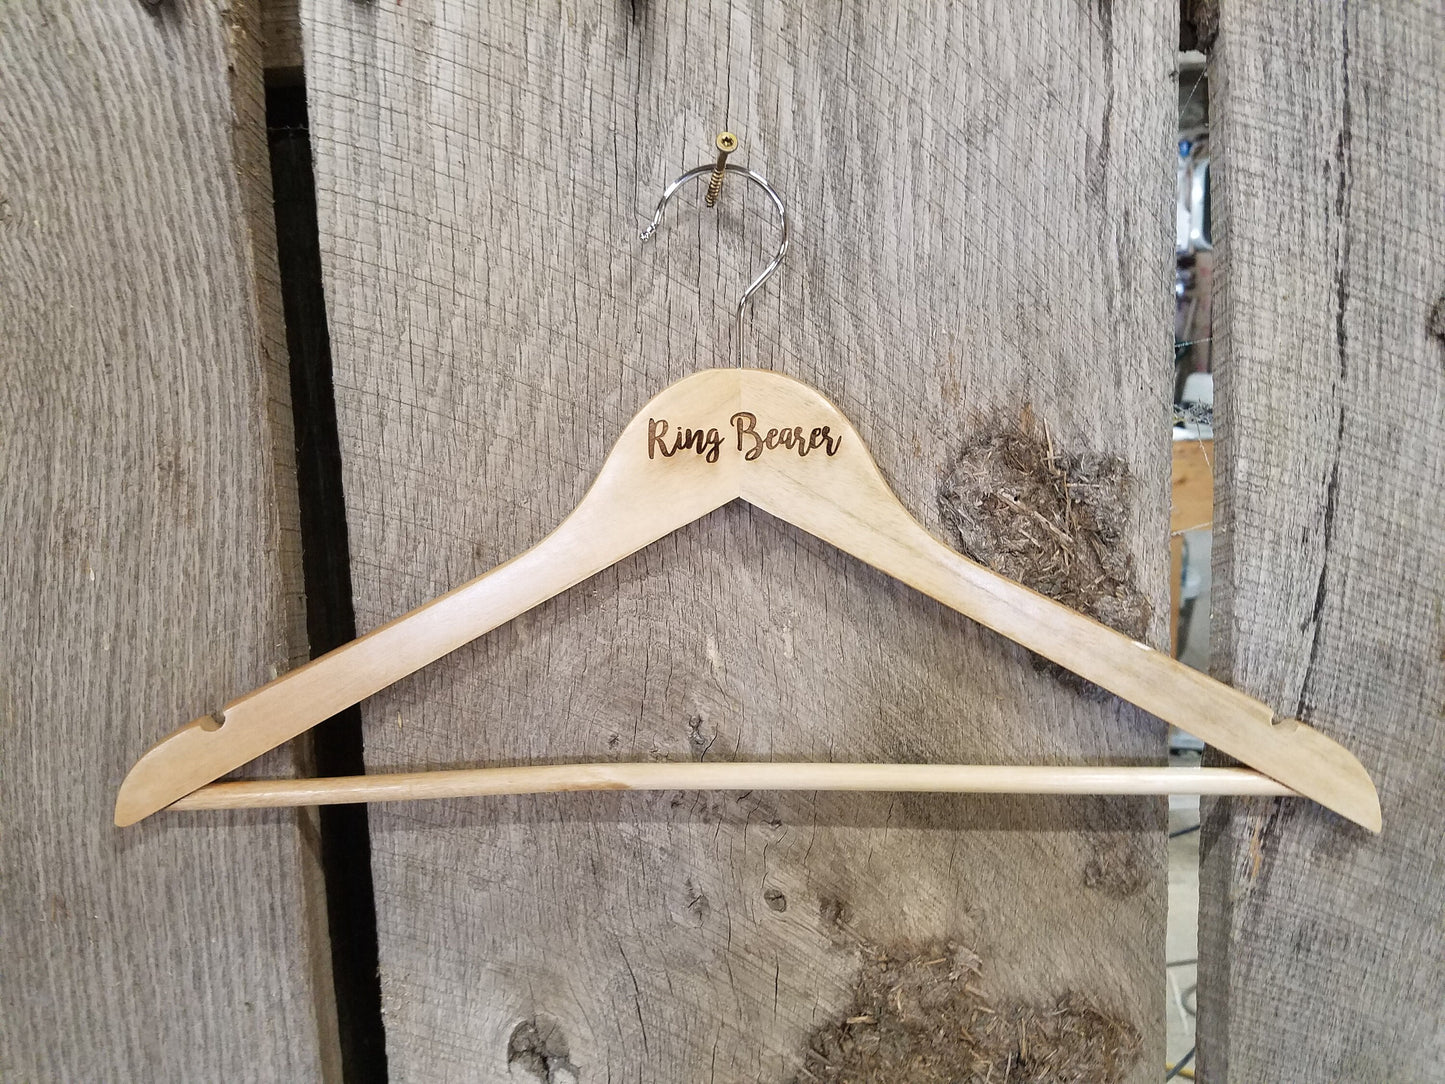 Ring Bearer Suit Clothes Hanger Bridal Party Engraved Hard Wood Coat Sturdy Wedding Bromellow Personalized